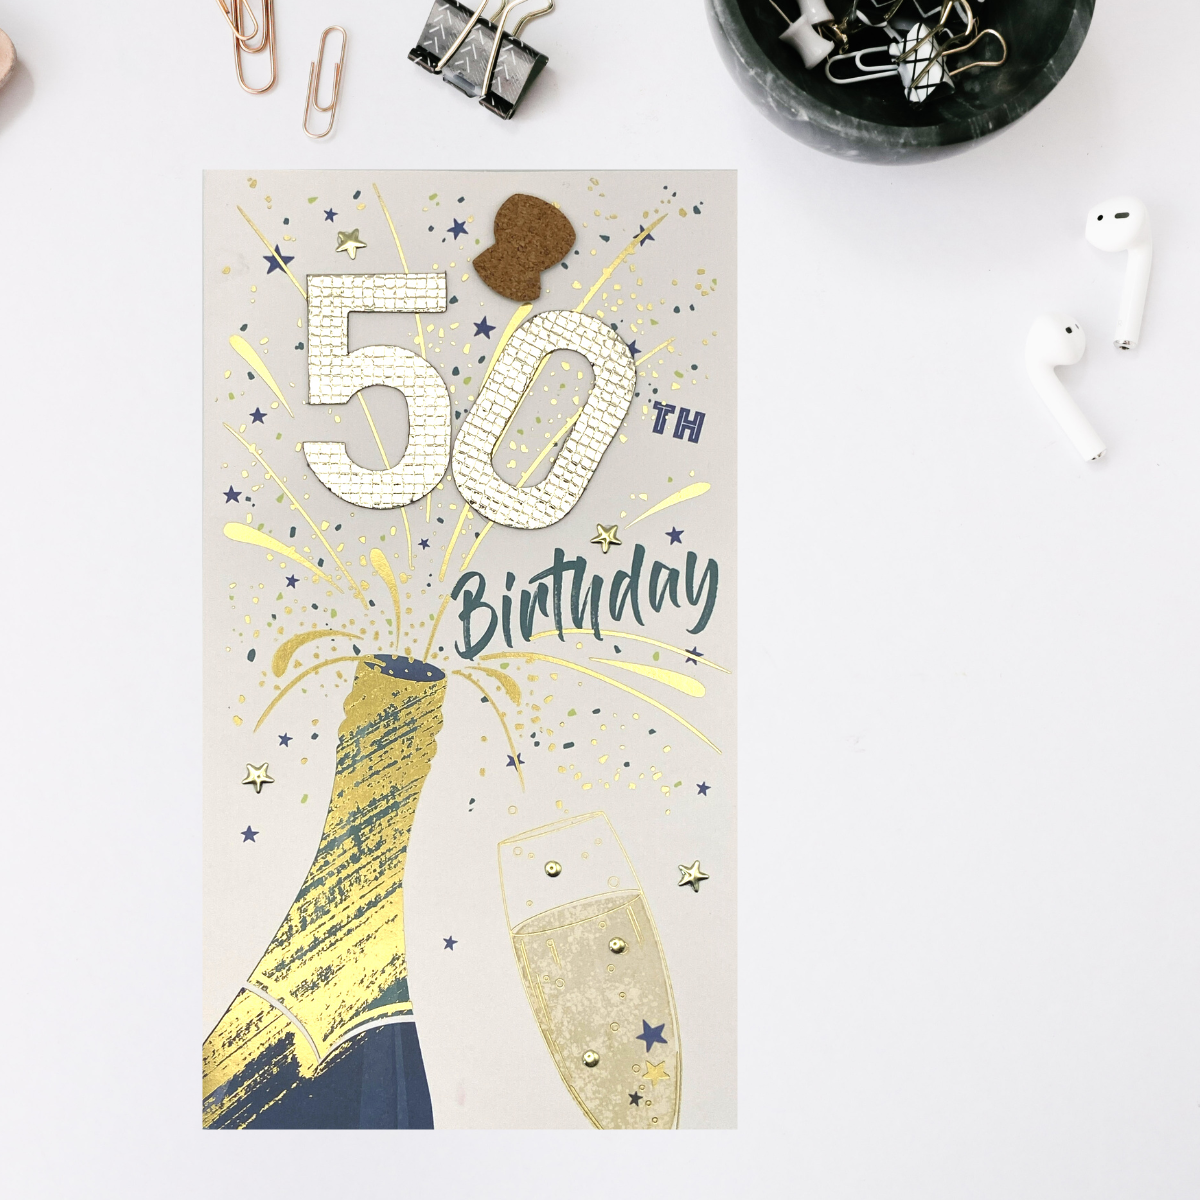 Front image showing champagne bottle popping and large gold decoupage numbers and stars